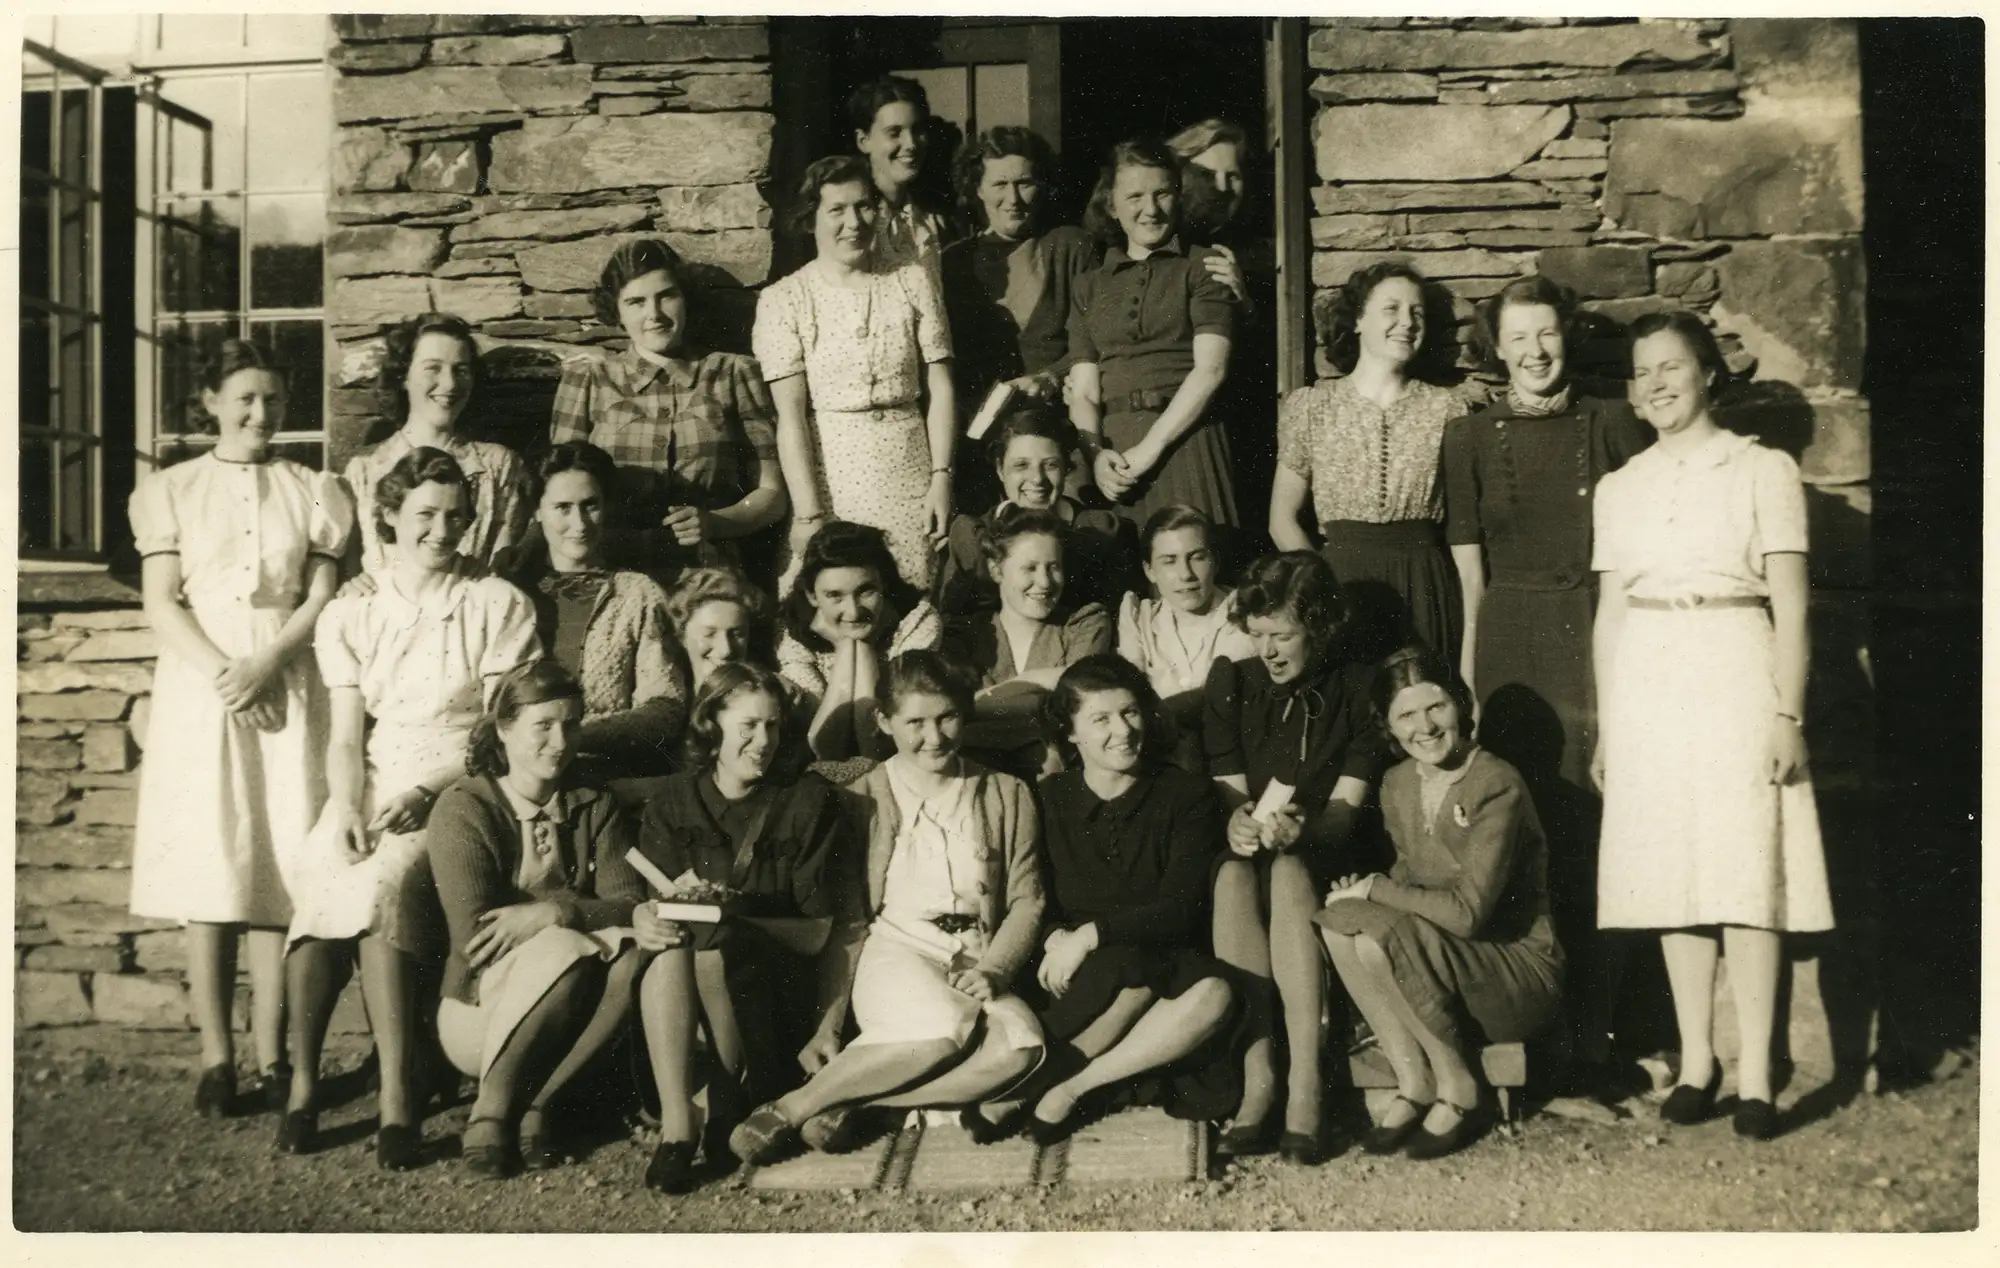 What was student life like in the 1940s? name